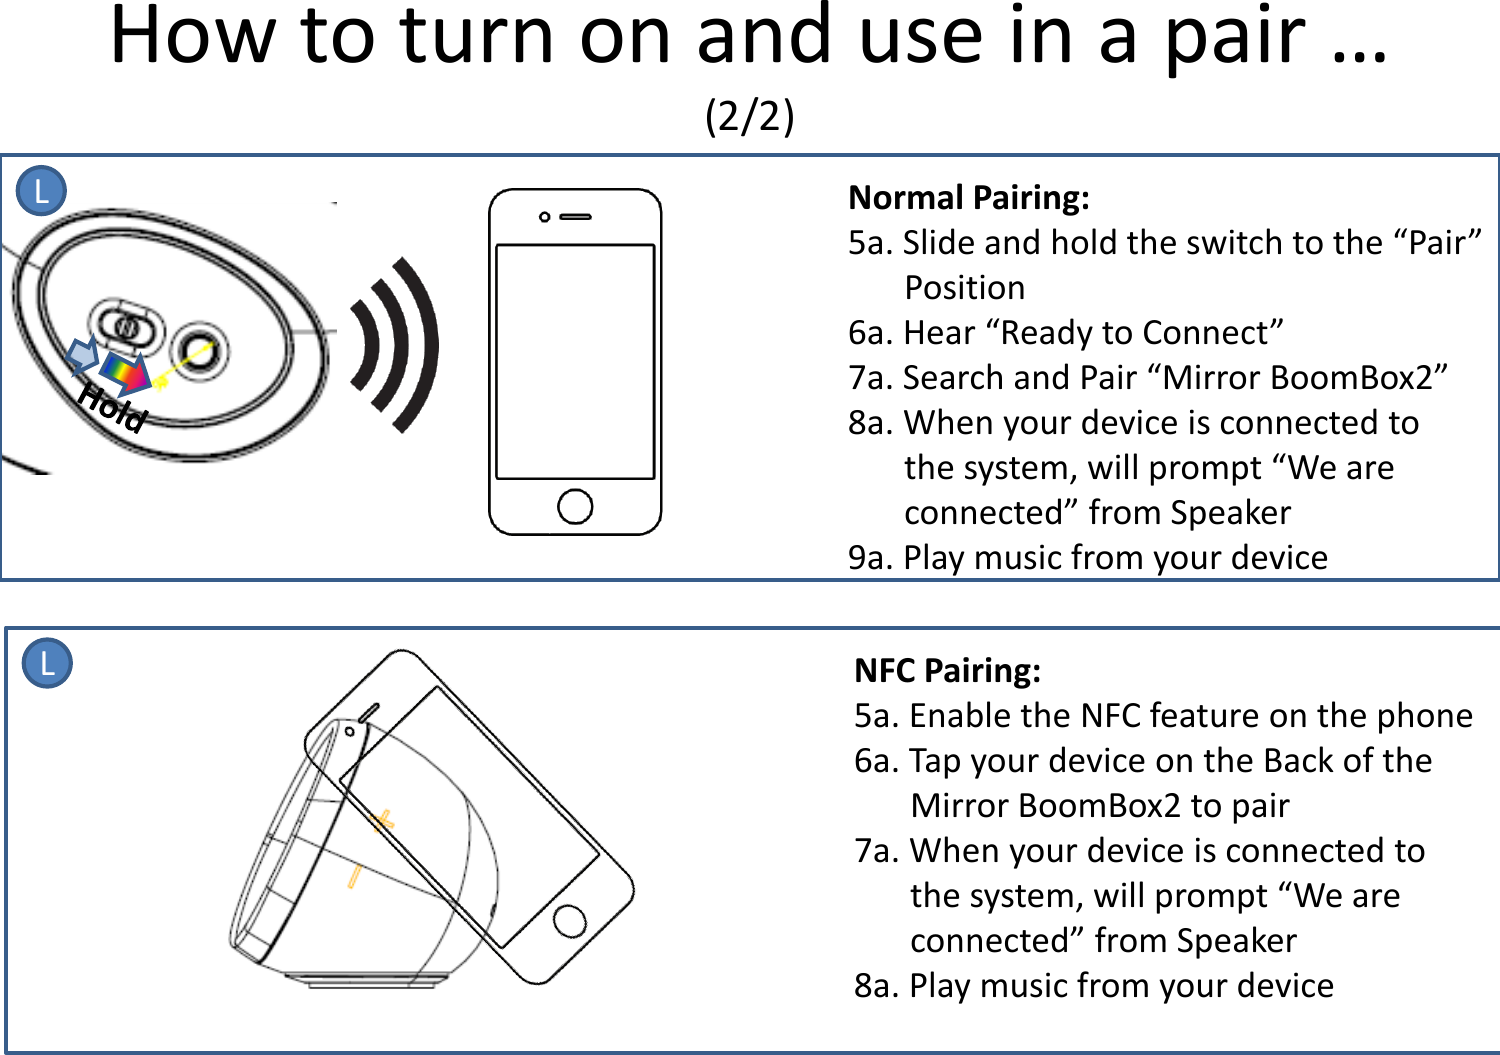 How to turn on and use in a pair … (2/2) L  Normal Pairing: 5a. Slide and hold the switch to the “Pair” Position 6a. Hear “Ready to Connect” 7a. Search and Pair “Mirror BoomBox2” 8a. When your device is connected to the system, will prompt “We are connected” from Speaker 9a. Play music from your device L  NFC Pairing: 5a. Enable the NFC feature on the phone 6a. Tap your device on the Back of the Mirror BoomBox2 to pair 7a. When your device is connected to the system, will prompt “We are connected” from Speaker 8a. Play music from your device 